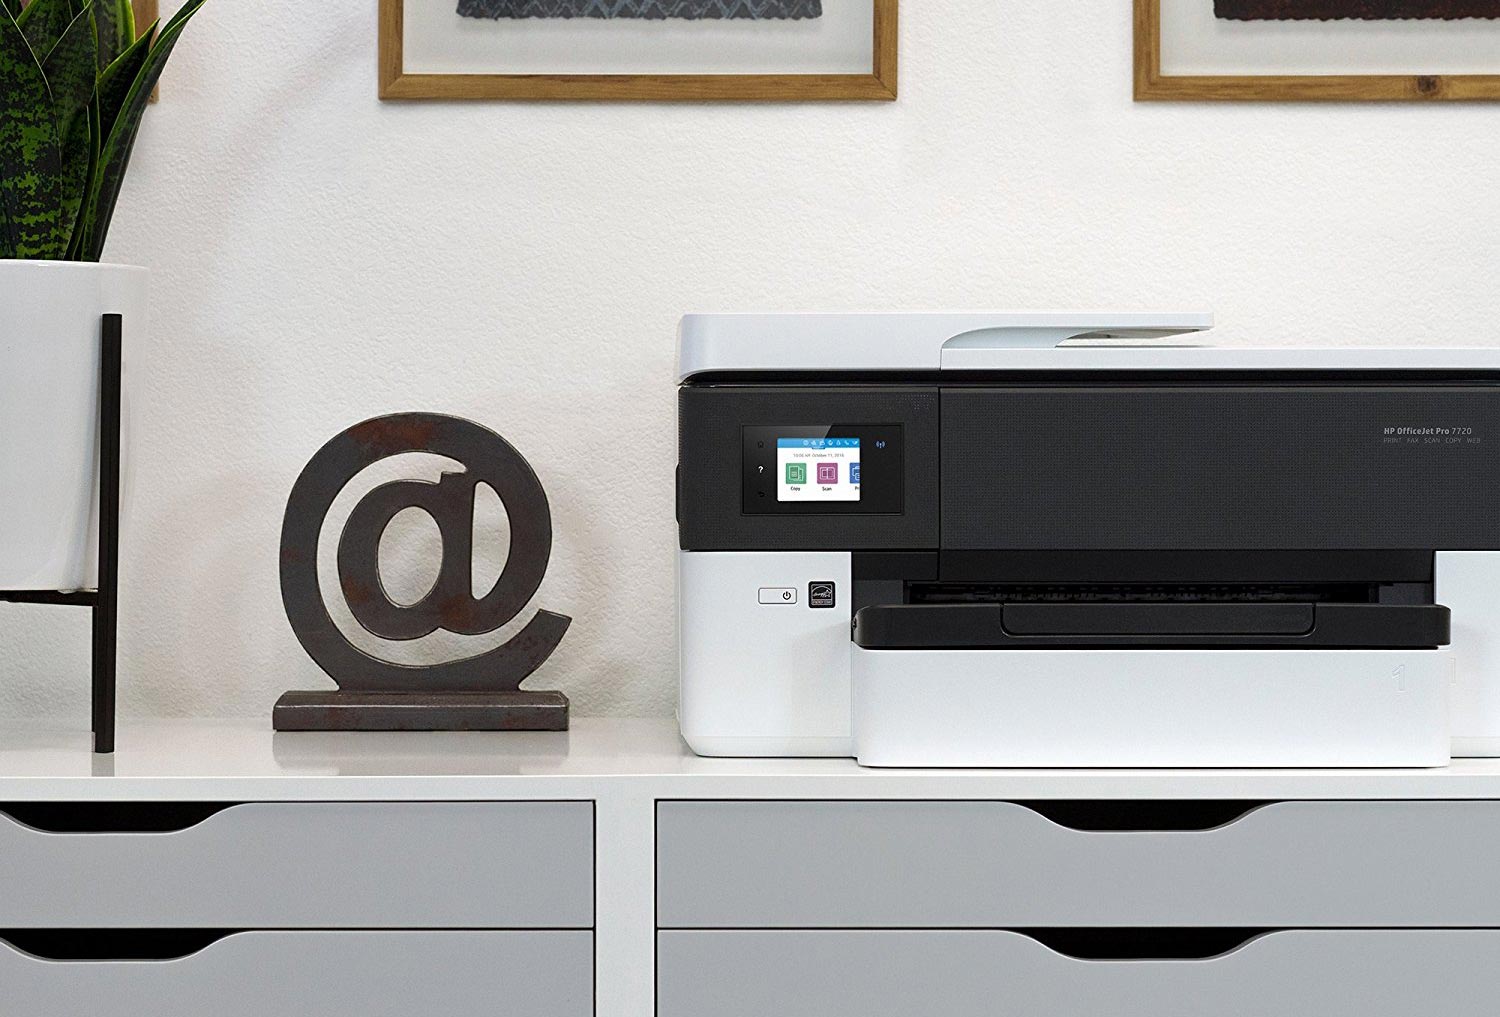 HP OfficeJet Pro 7720 Printer Review: Great Quality, Mediocre Value